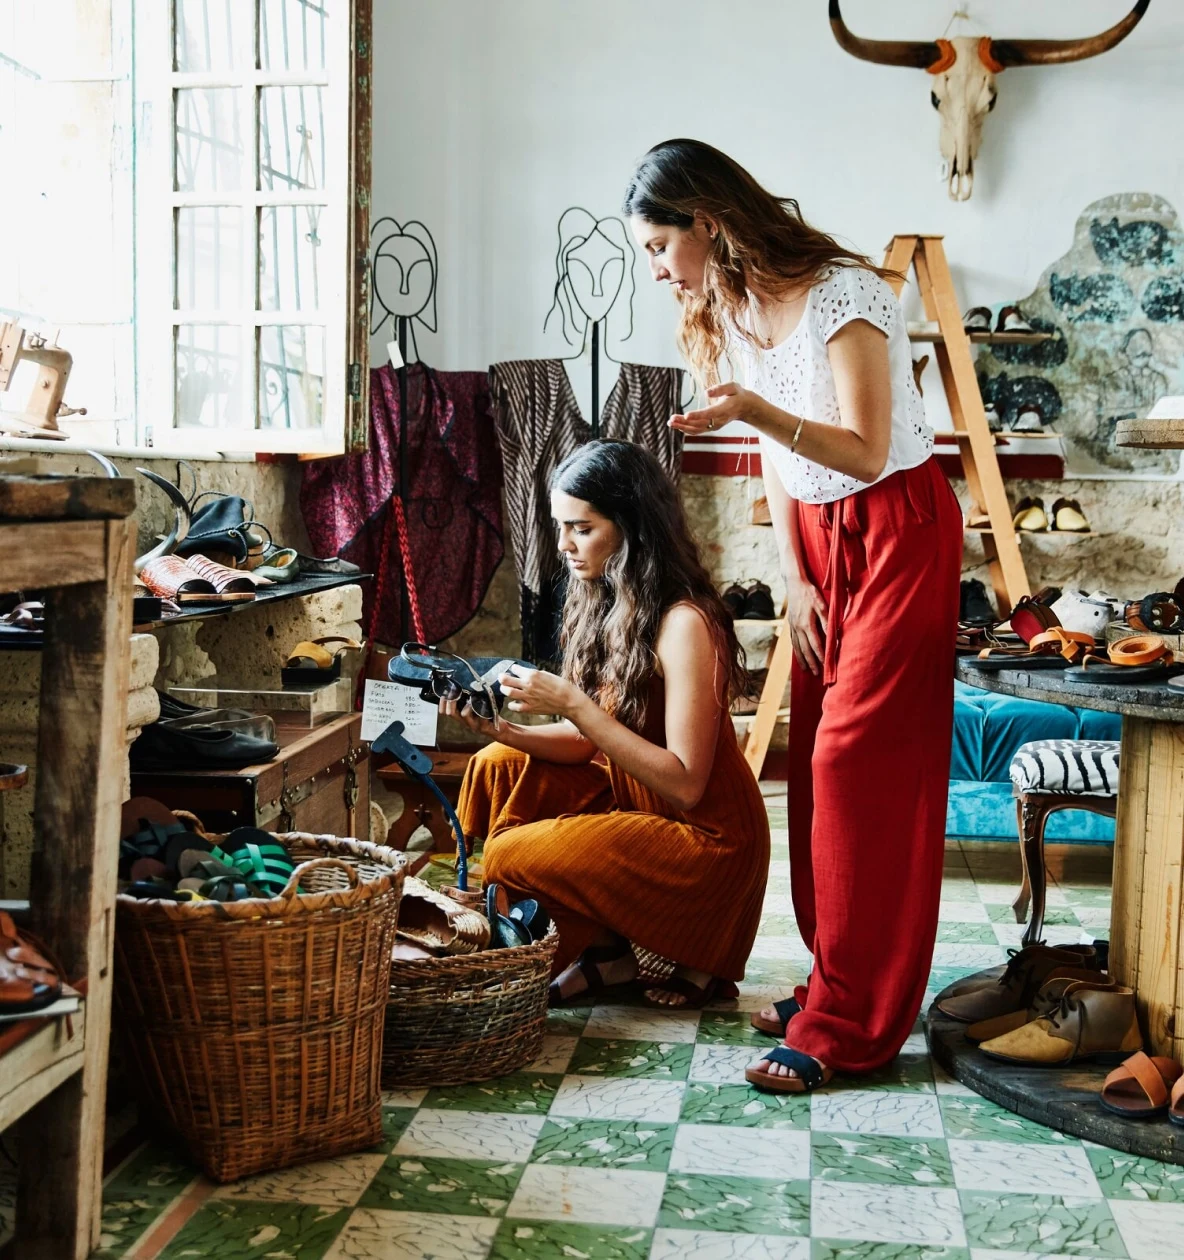 Two women with long dark hair examine a pair of sandals in a clothes shop